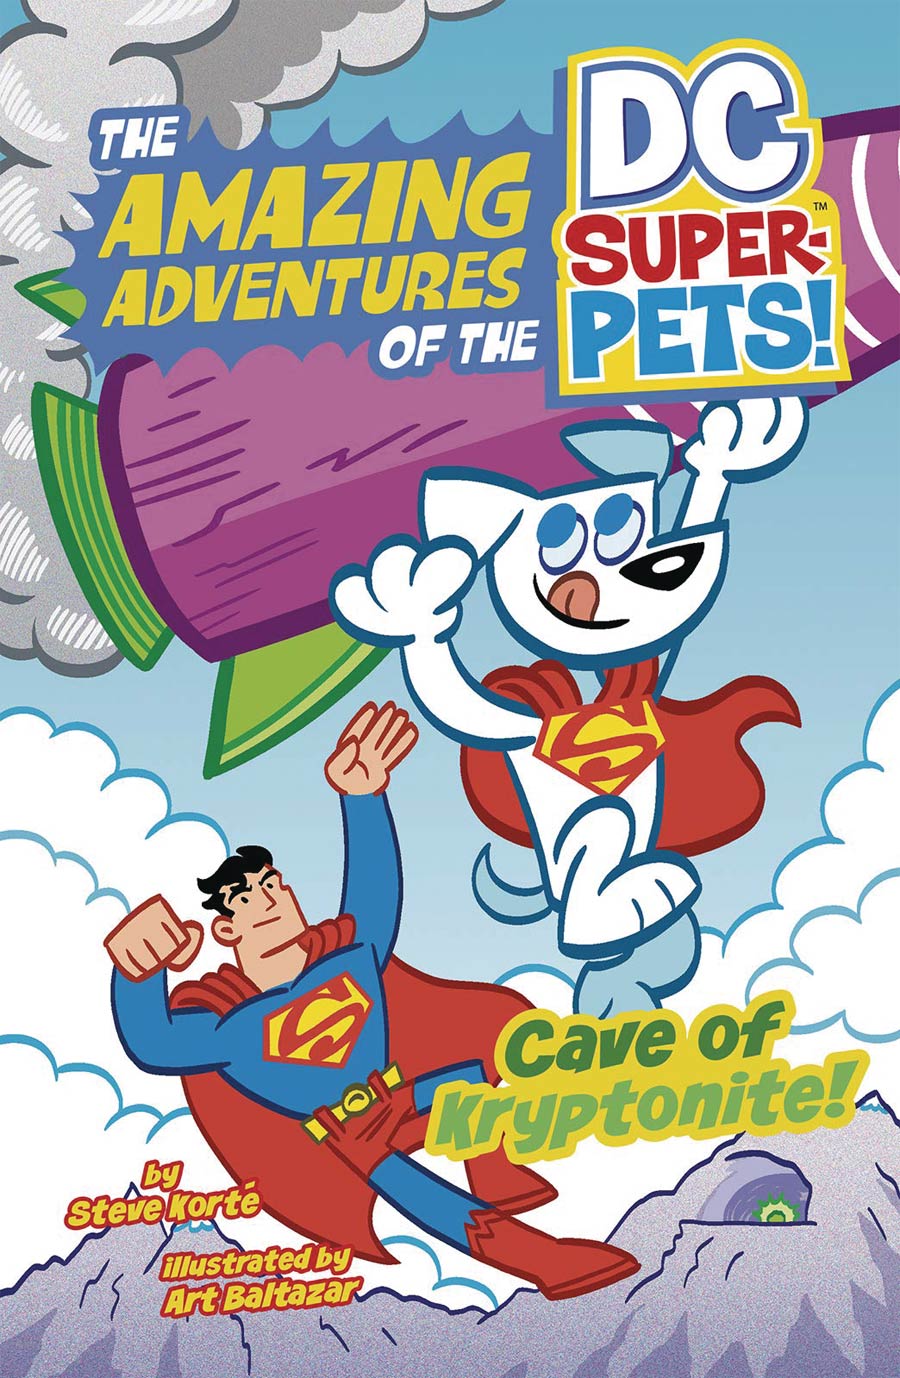 Amazing Adventures Of The DC Super-Pets Cave Of Kryptonite TP